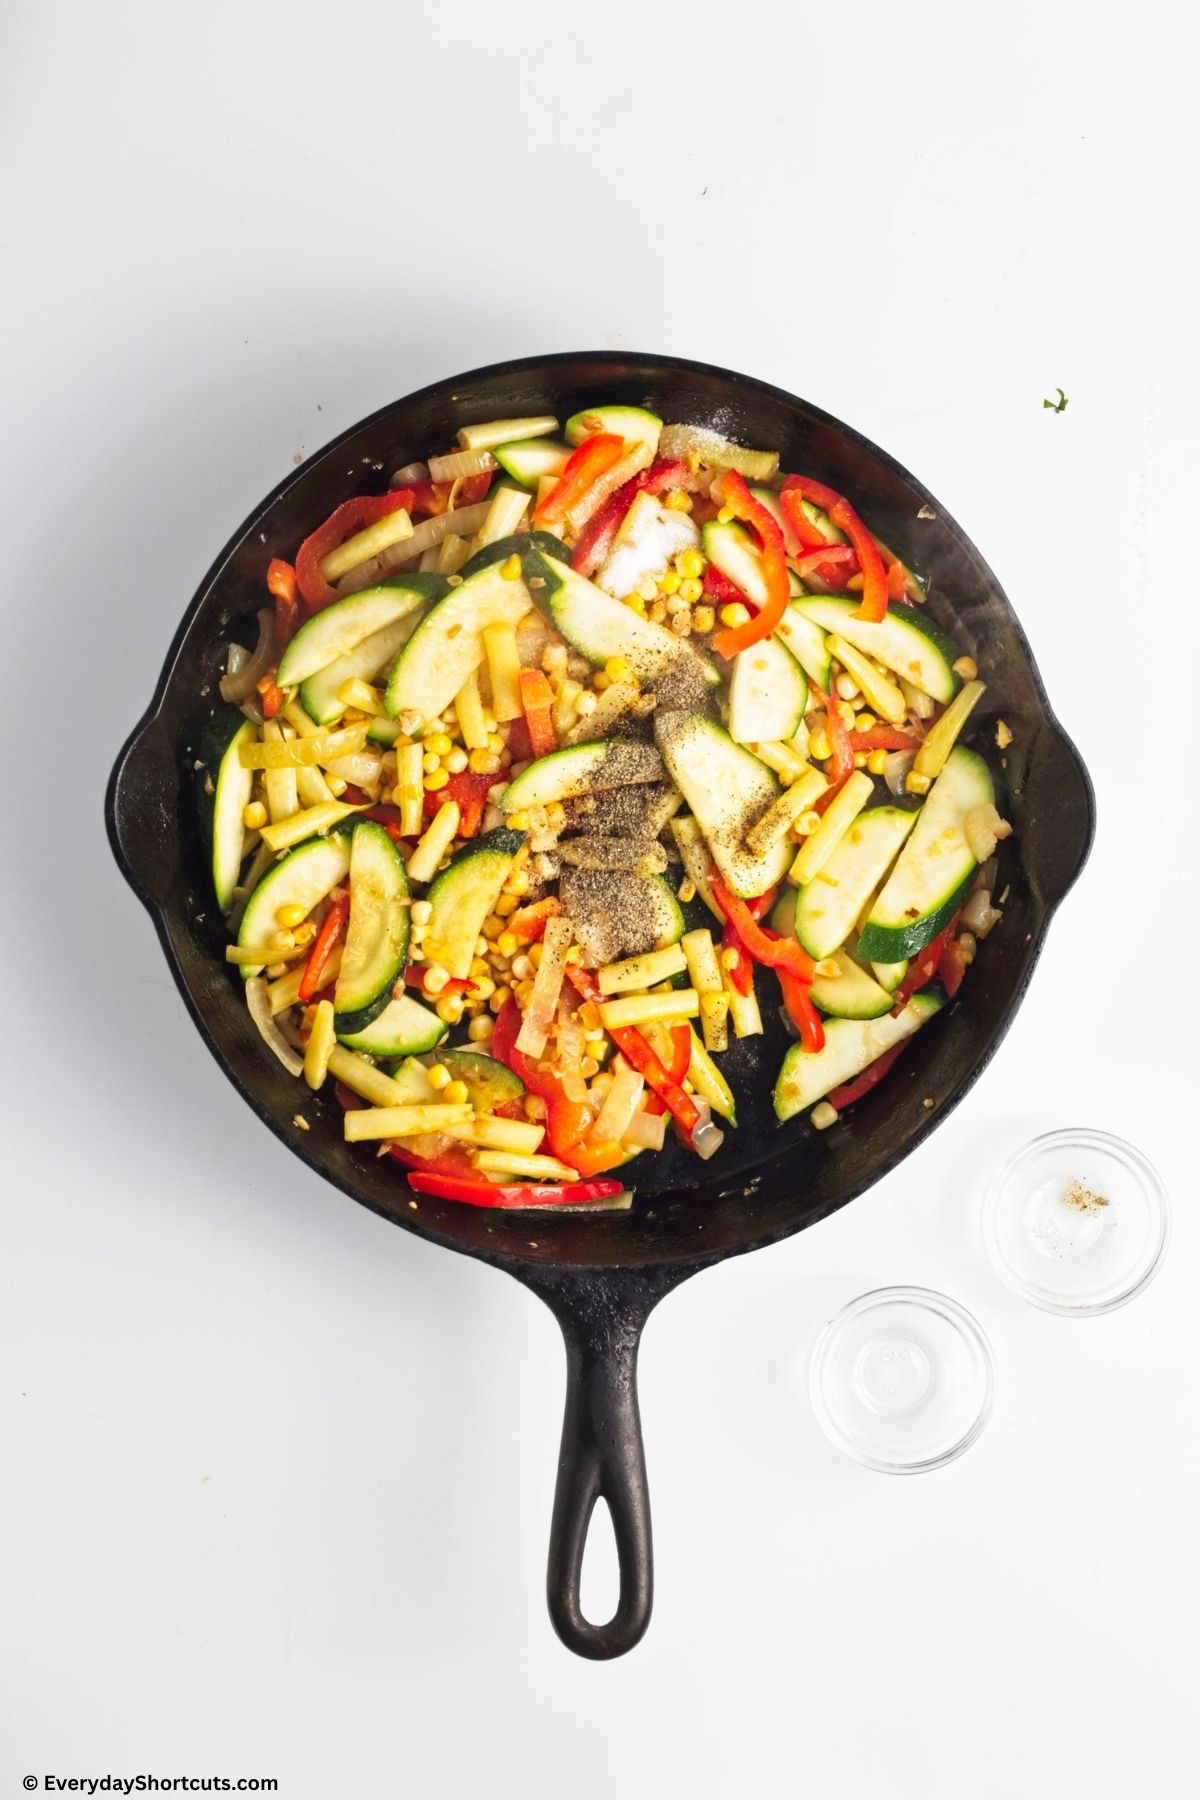 cooking vegetables in a pan